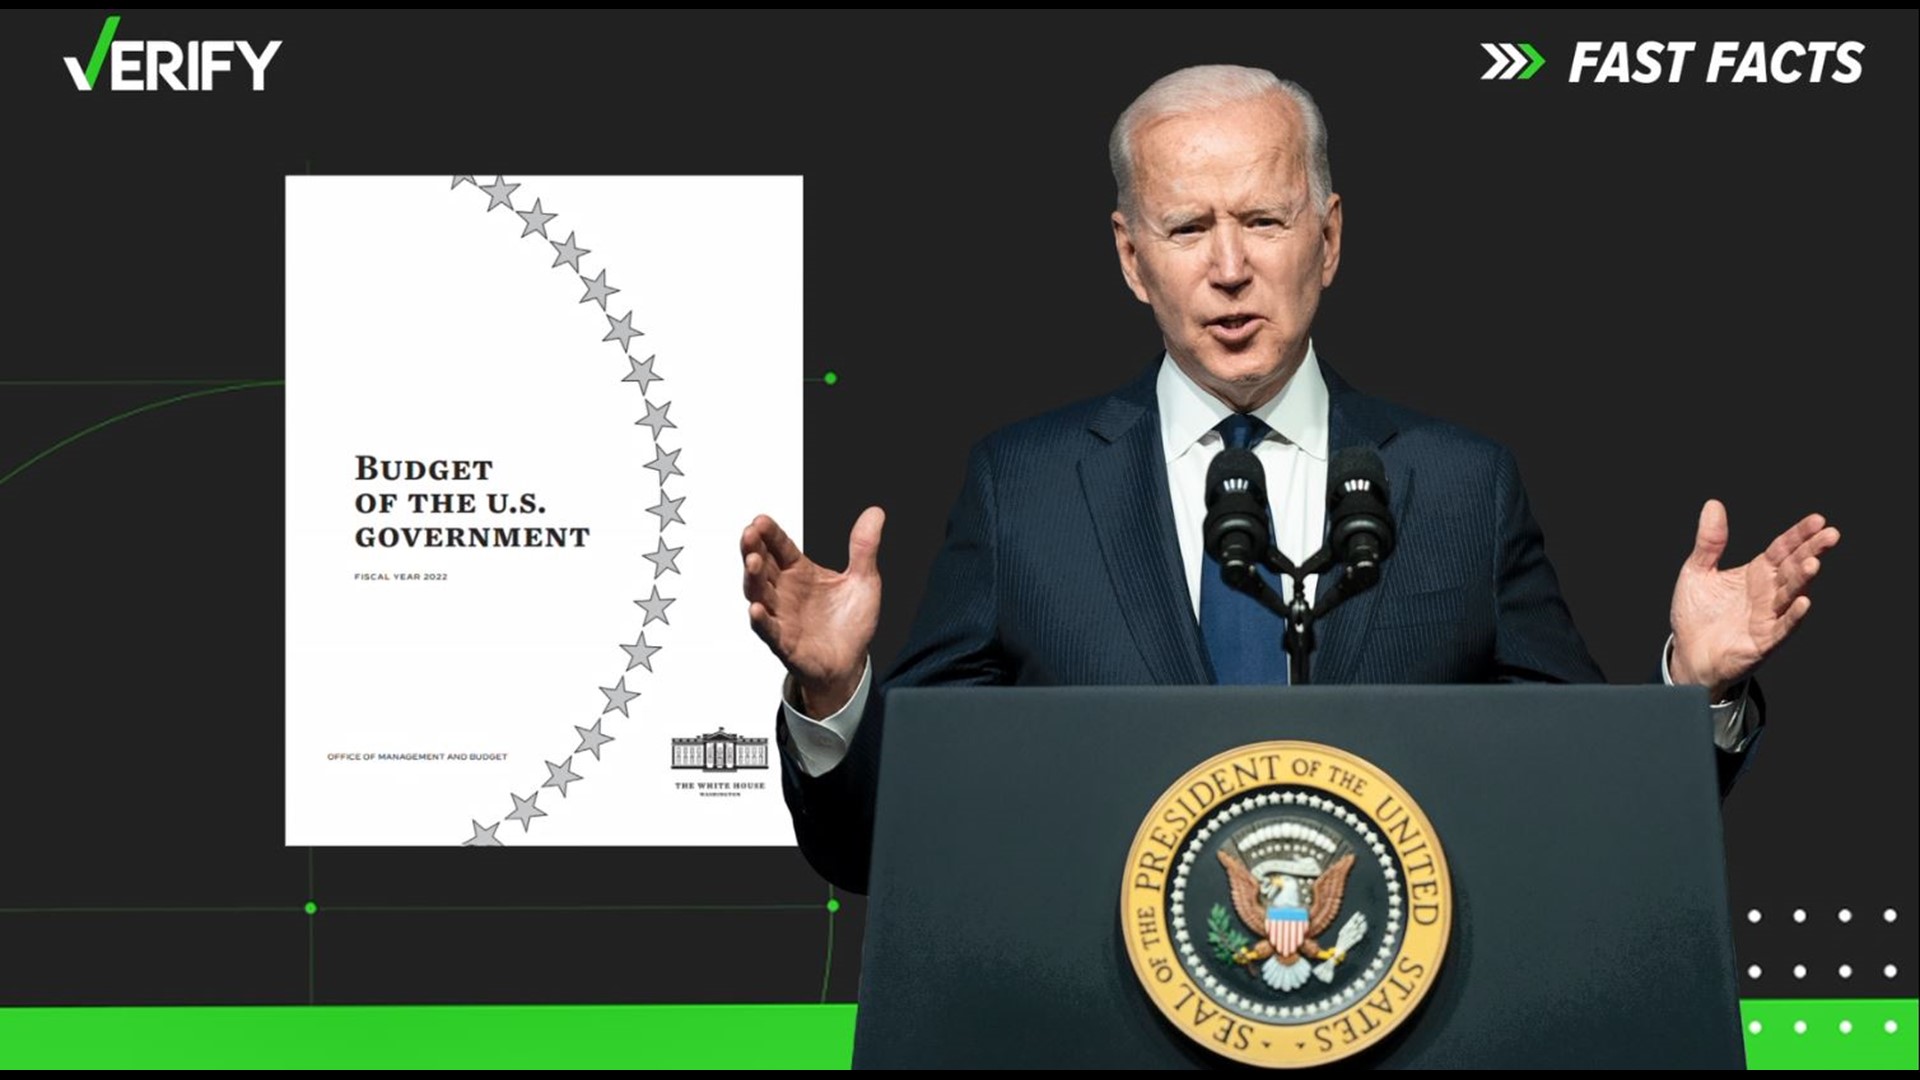 President Joe Biden has released his proposed budget and the omission of federal student loan debt forgiveness has caught many people's attention.